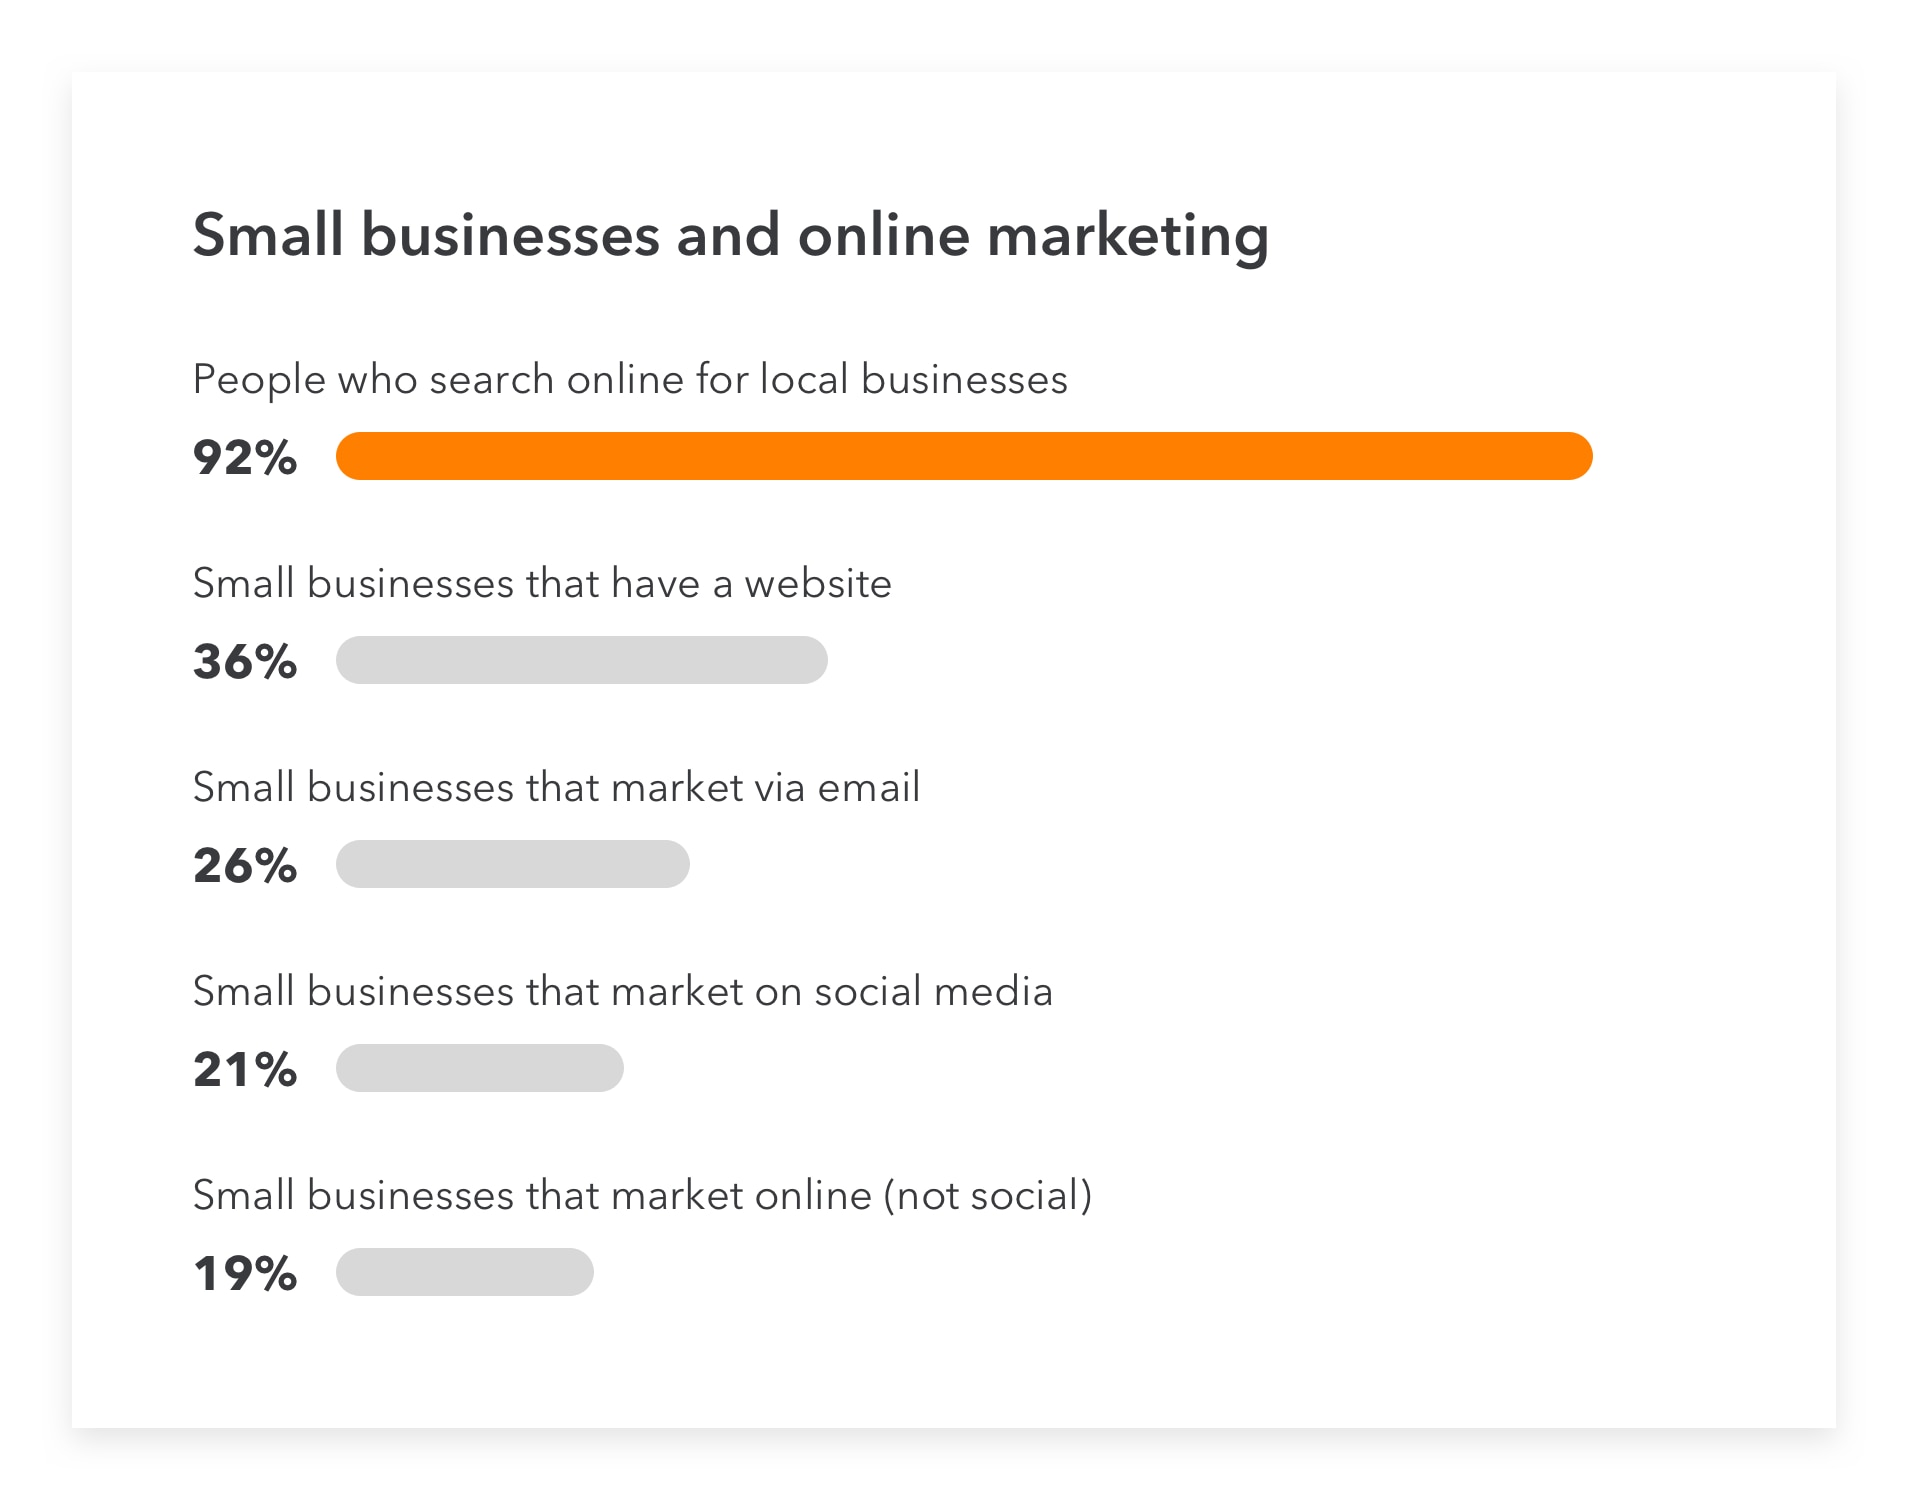 Small business marketing statistic relating to number of local business searches made online.